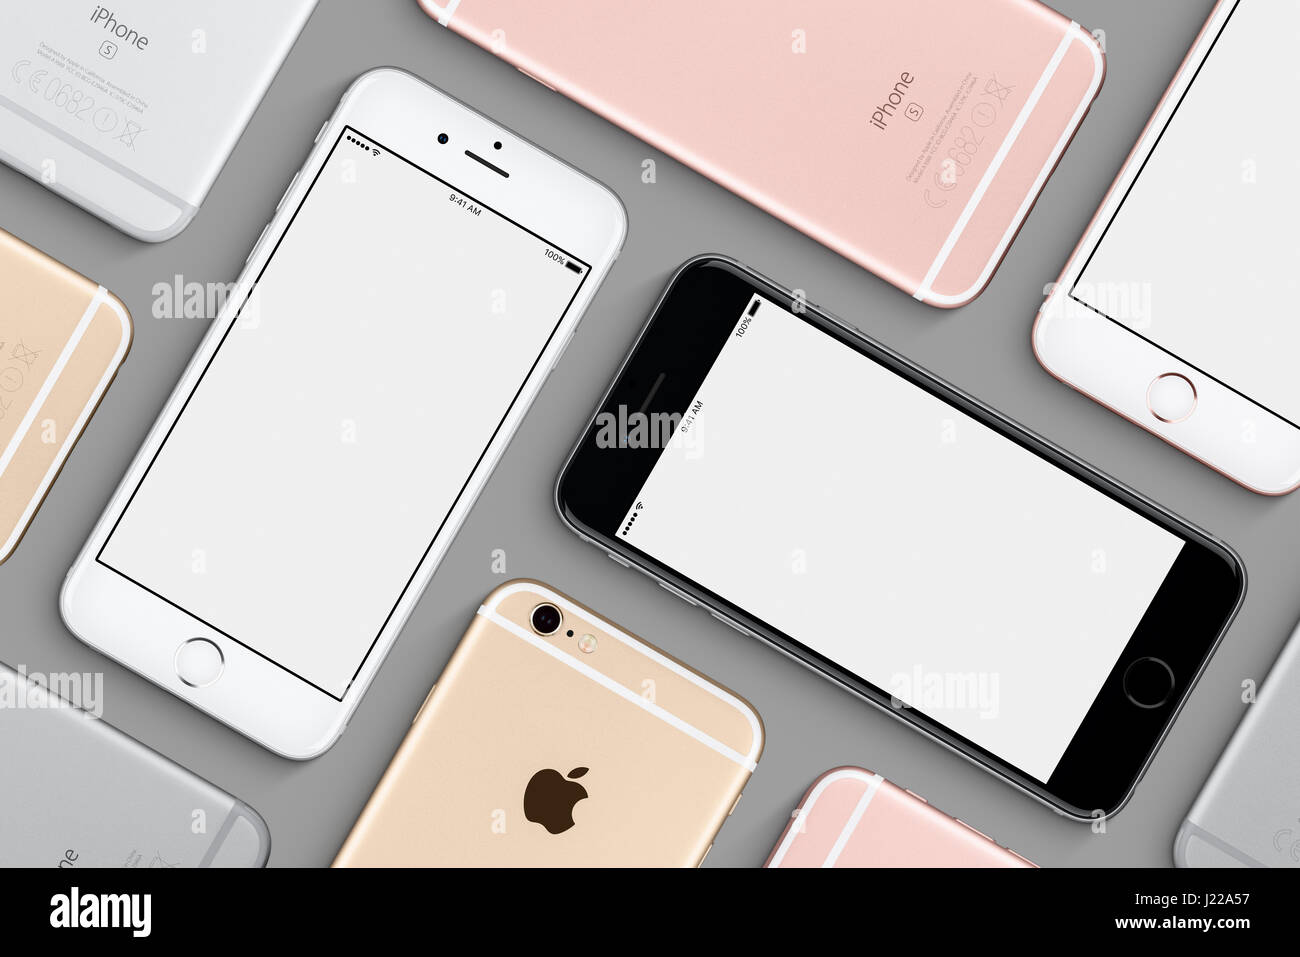 Varna, Bulgaria - March 10, 2016: Set of Apple iPhones 6s mockup top view flat lay with white screen and back side lies on gray surface. High quality  Stock Photo